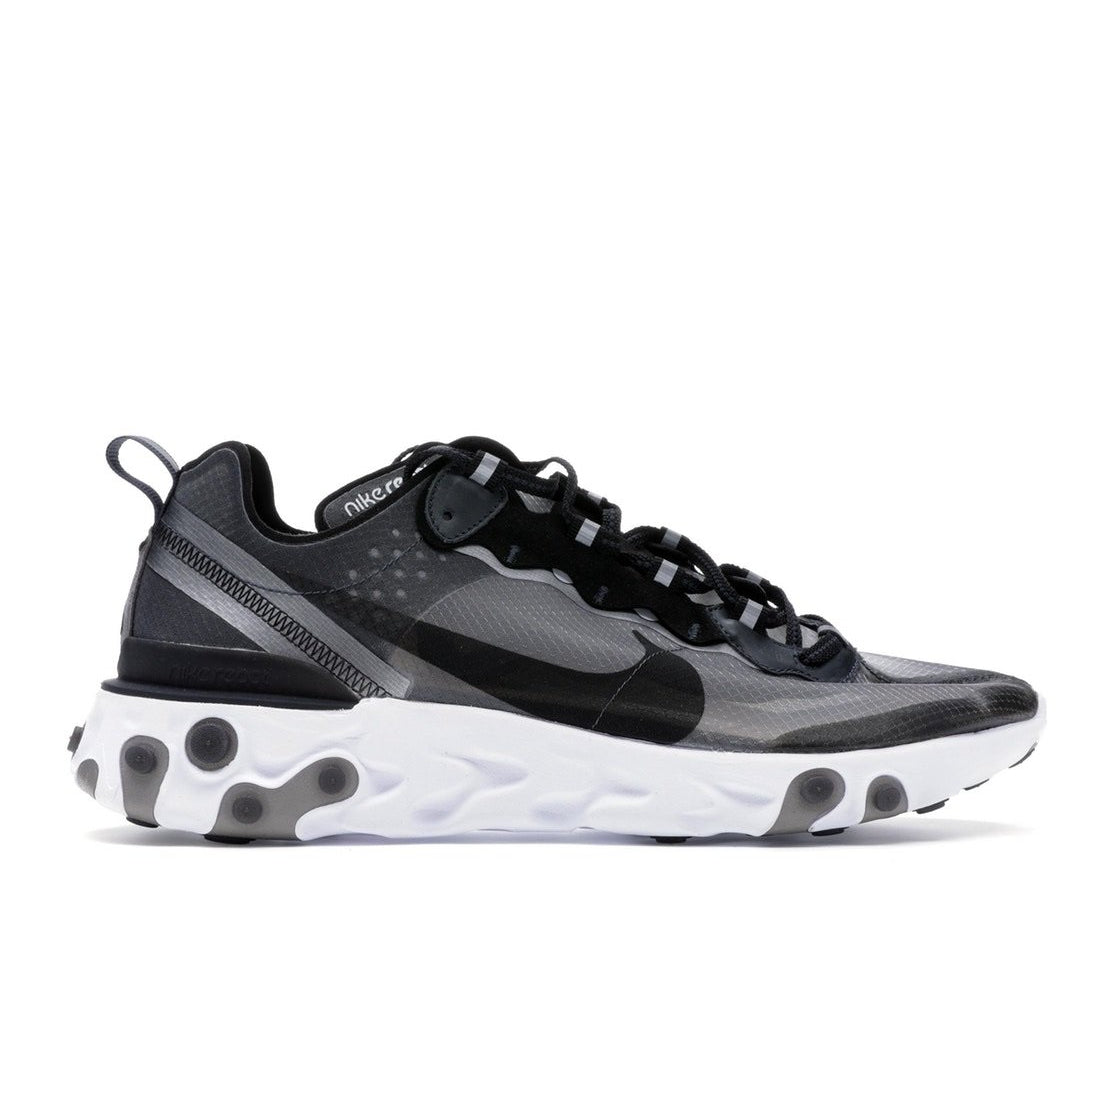 Nike React Element 87 Anthracite Black - Centrall Online